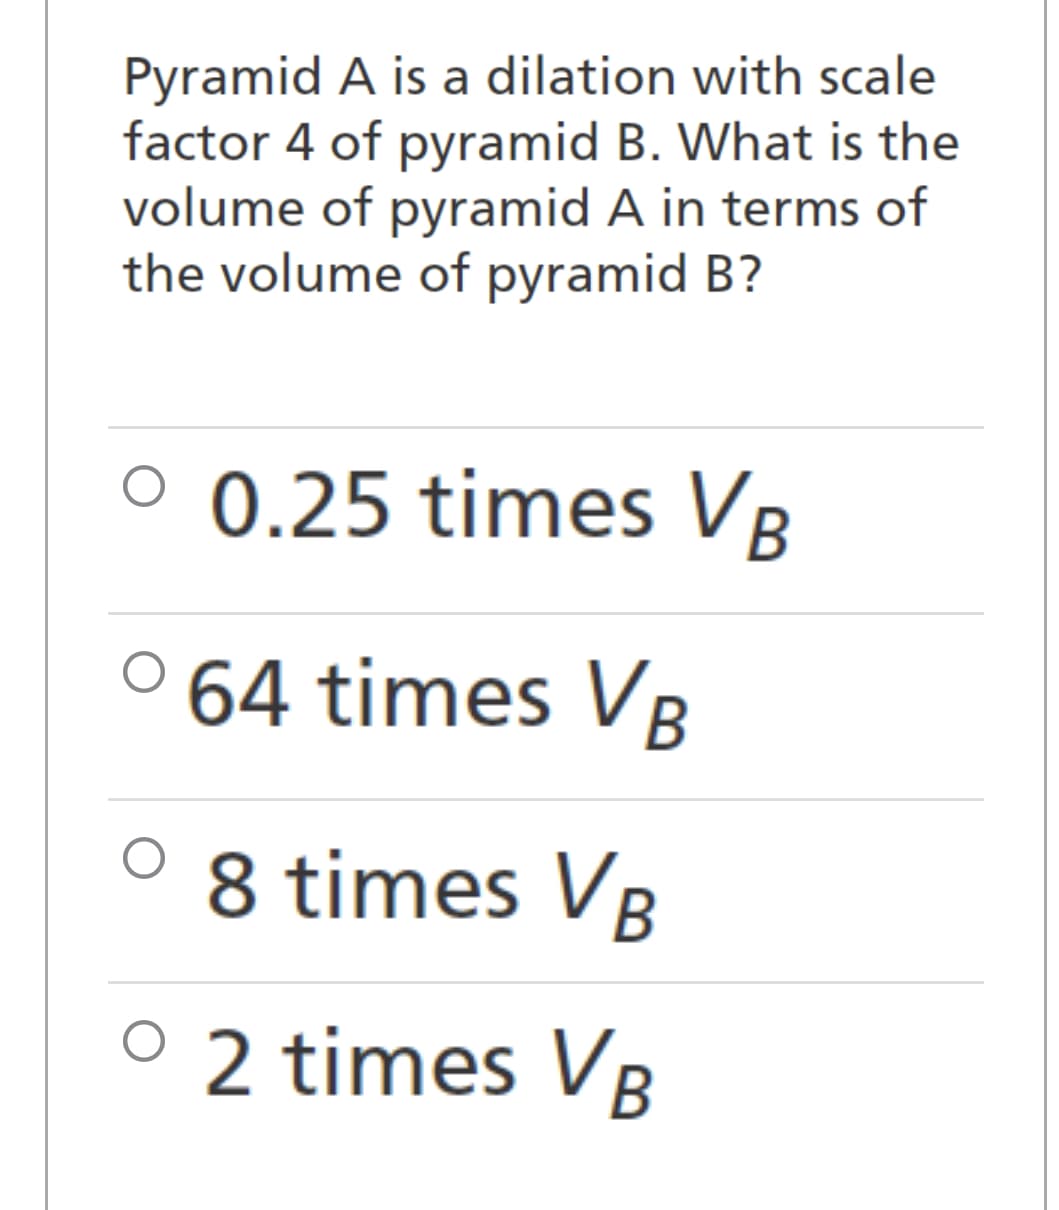 Pyramid A is a dilation with scale
factor 4 of pyramid B. What is the
volume of pyramid A in terms of
the volume of pyramid B?
O 0.25 times VB
° 64 times VB
8 times VB
° 2 times VB
O